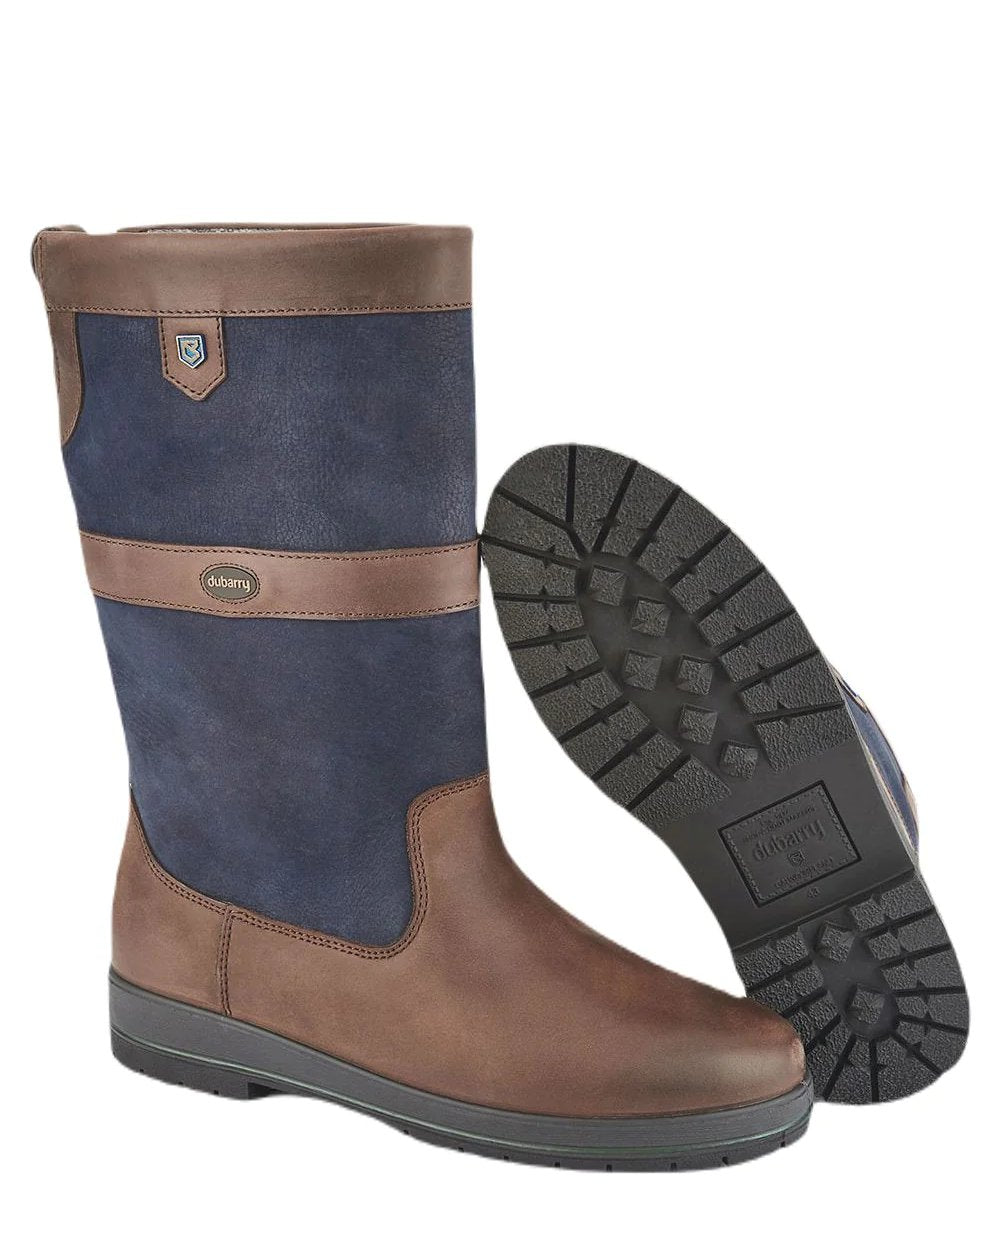 Dubarry Kildare Country Boots in Navy Brown 